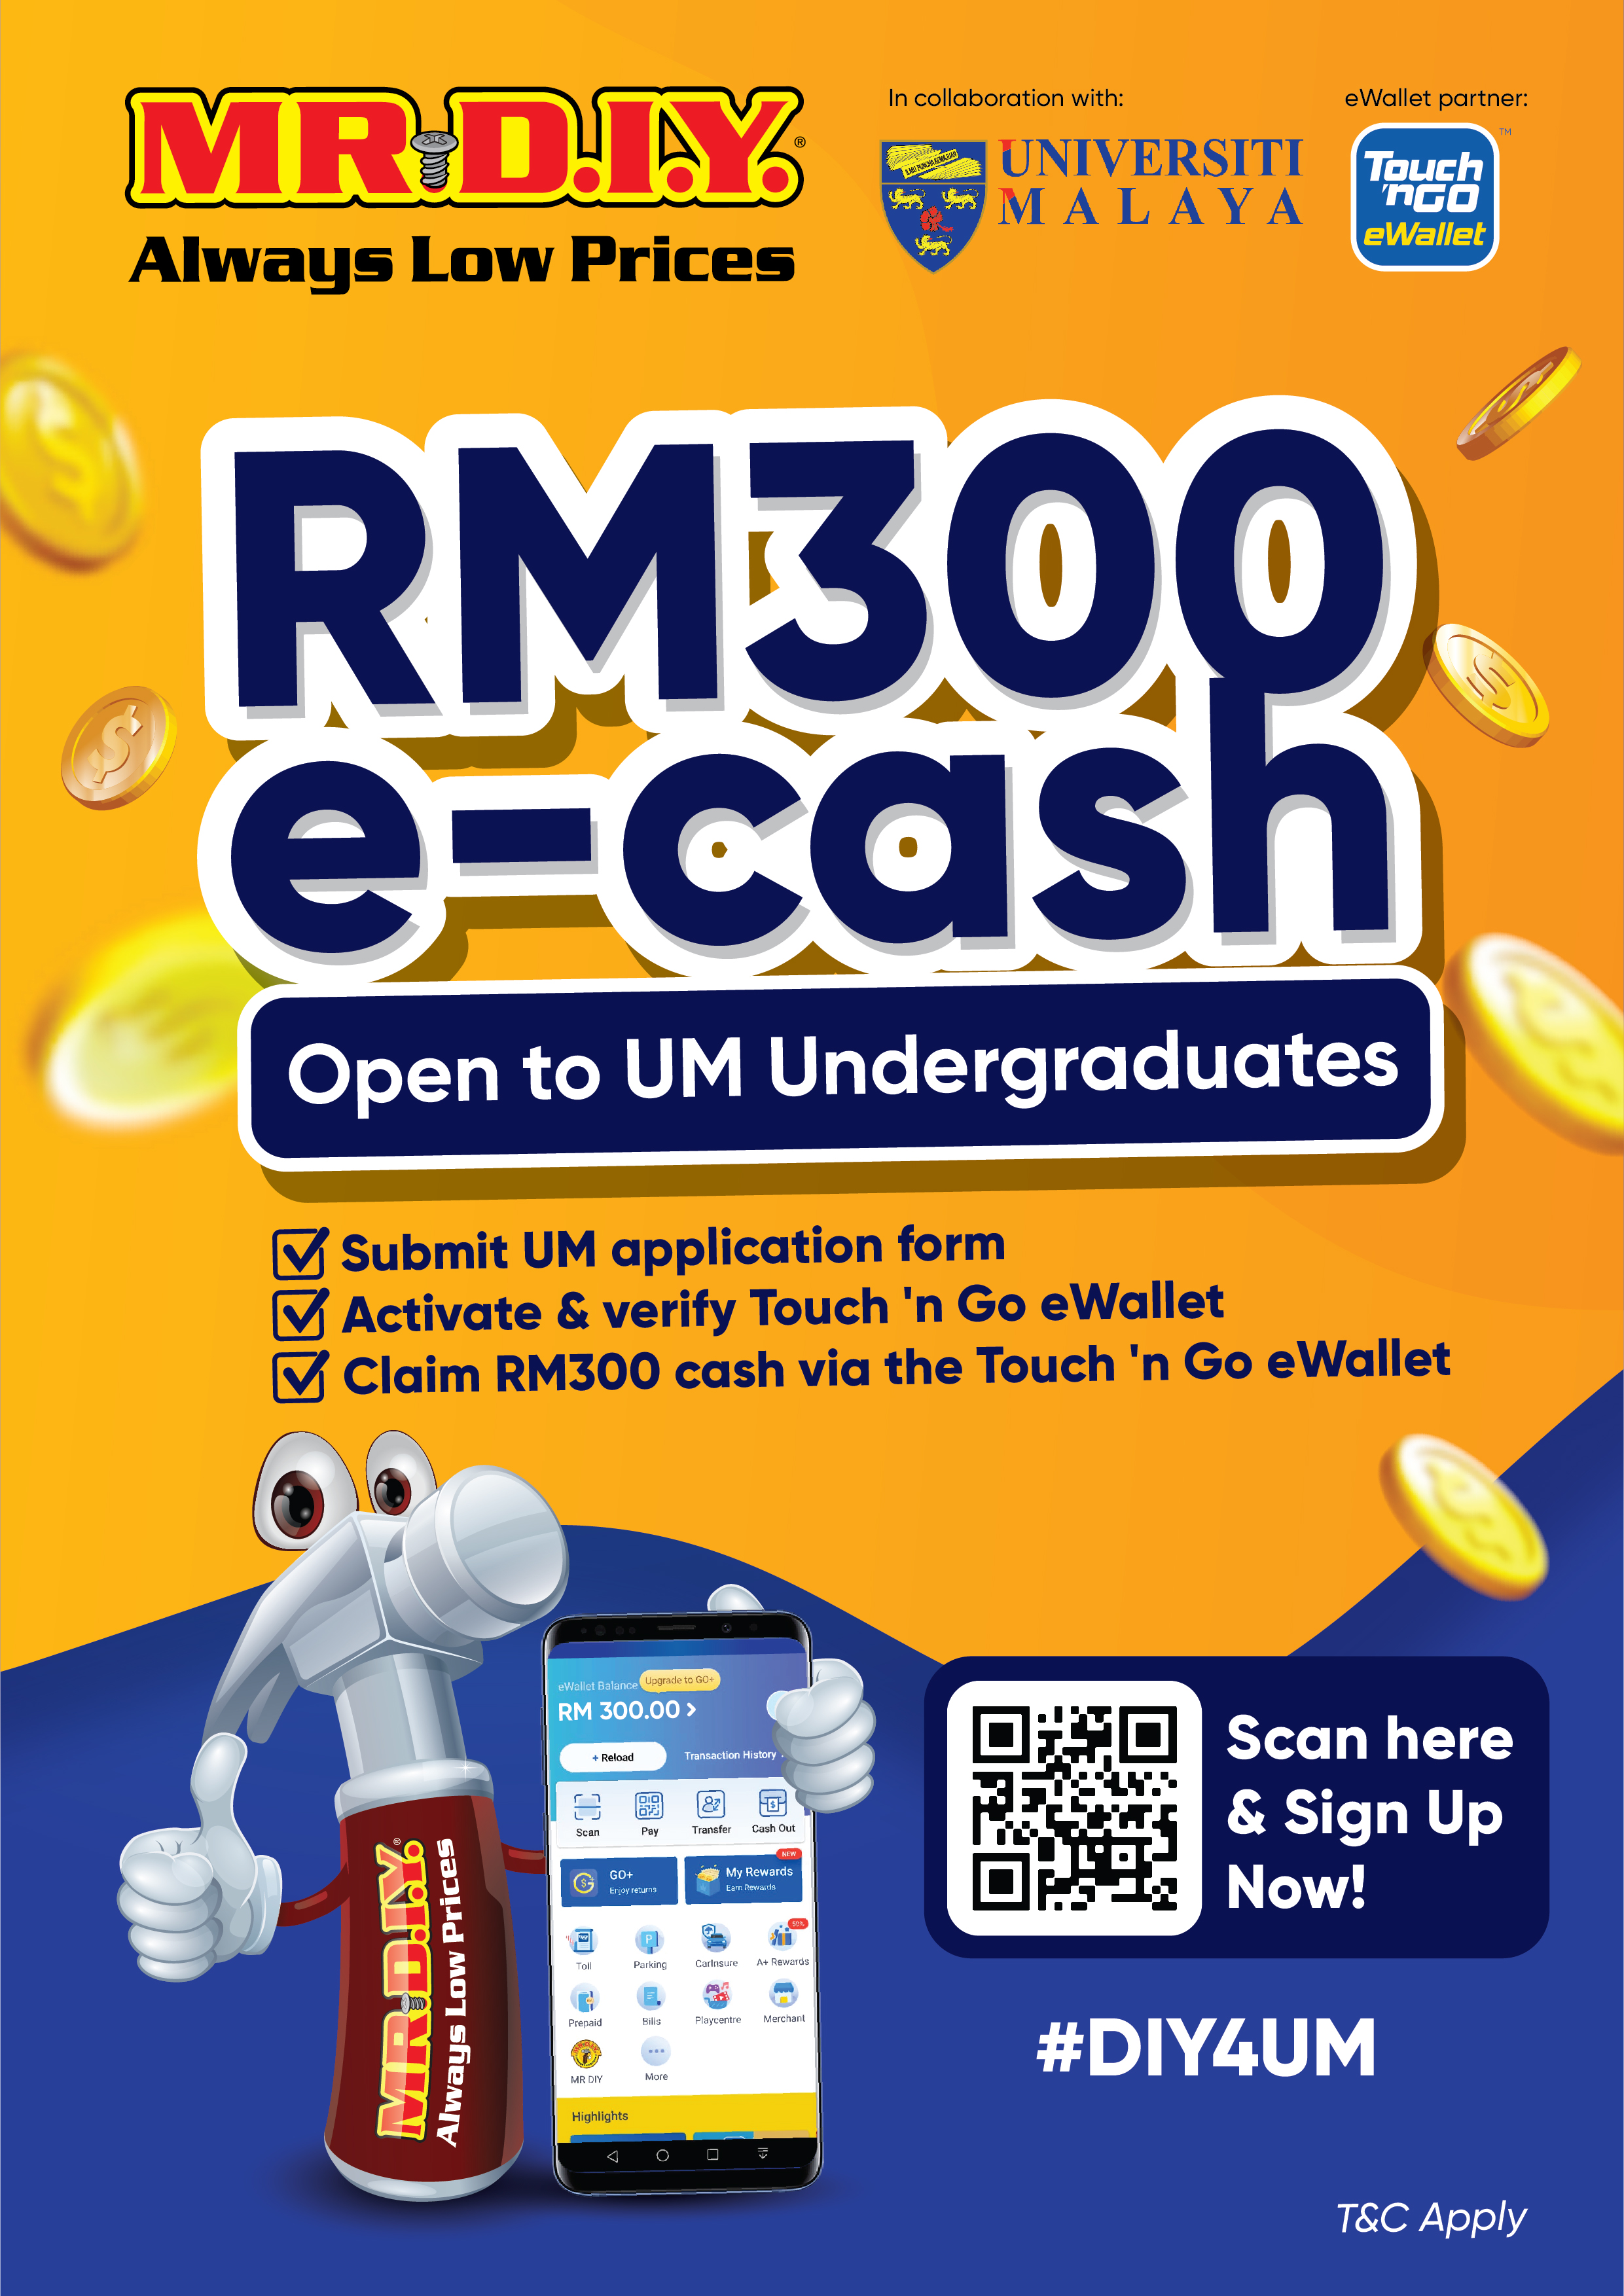 MR D.I.Y. distributes RM300 in cash via Touch ‘n Go eWallet to 15,000 UM students